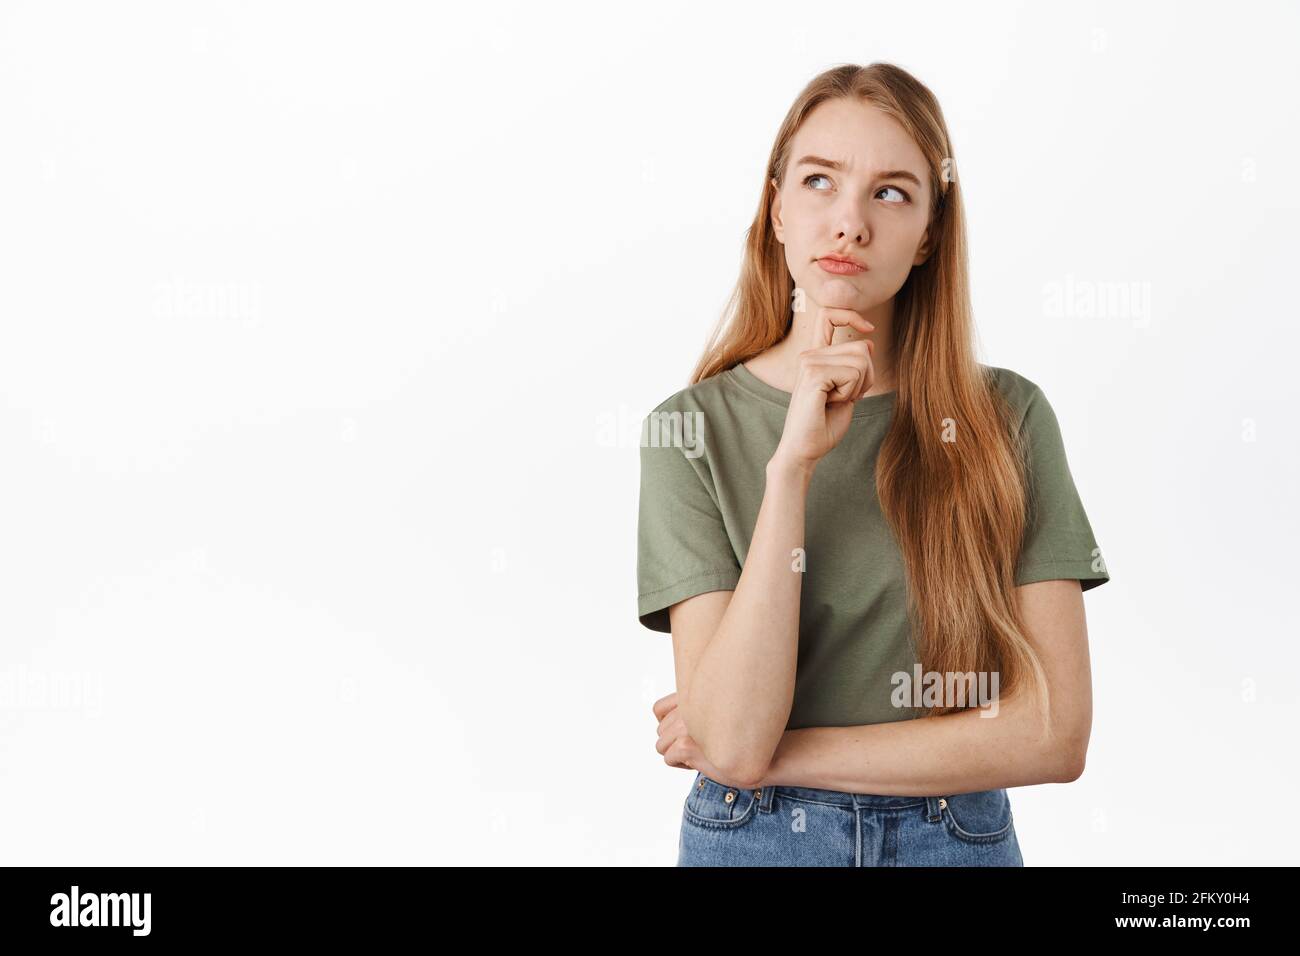 Thoughtful young woman making serious decision, looking up while pondering choices, frowning while thinking, standing in t-shirt and jeans against Stock Photo